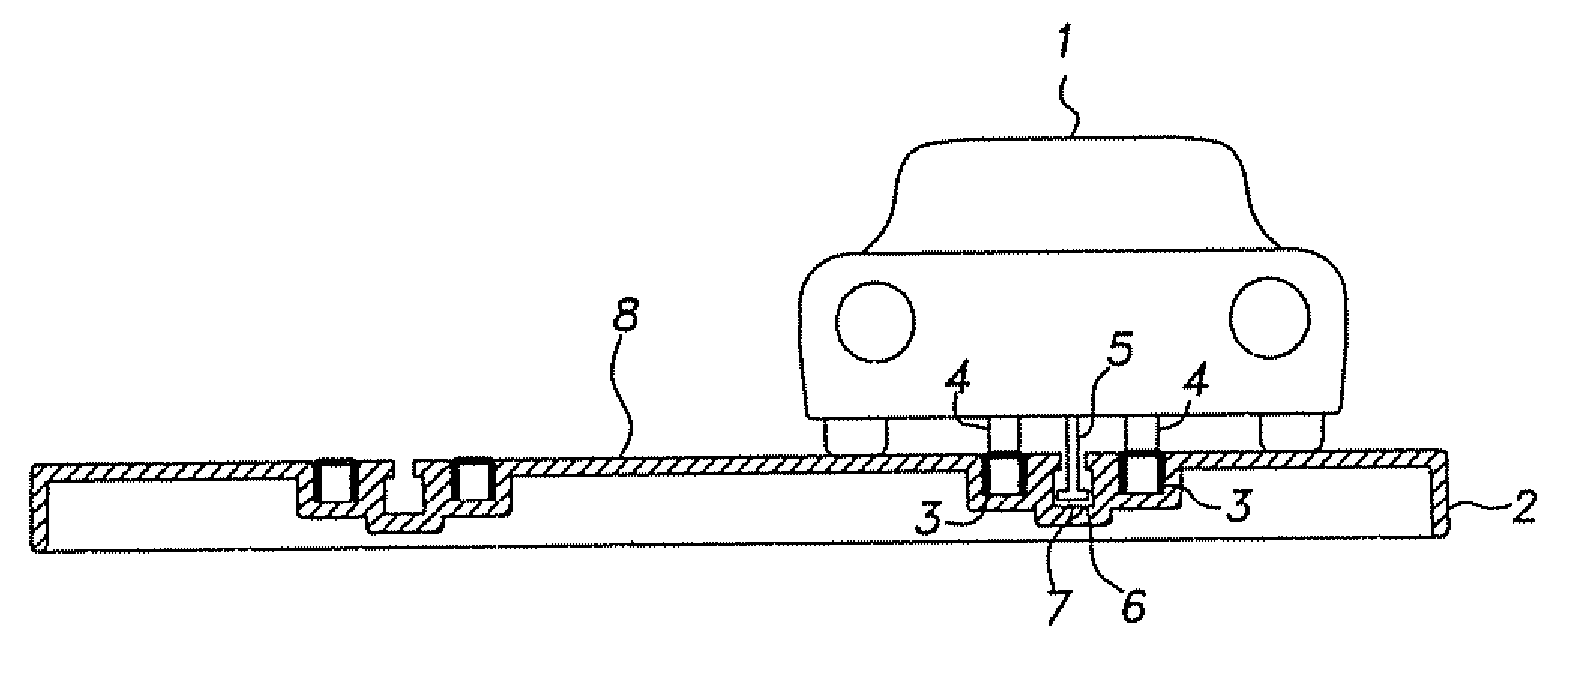 Toy object and slot track system